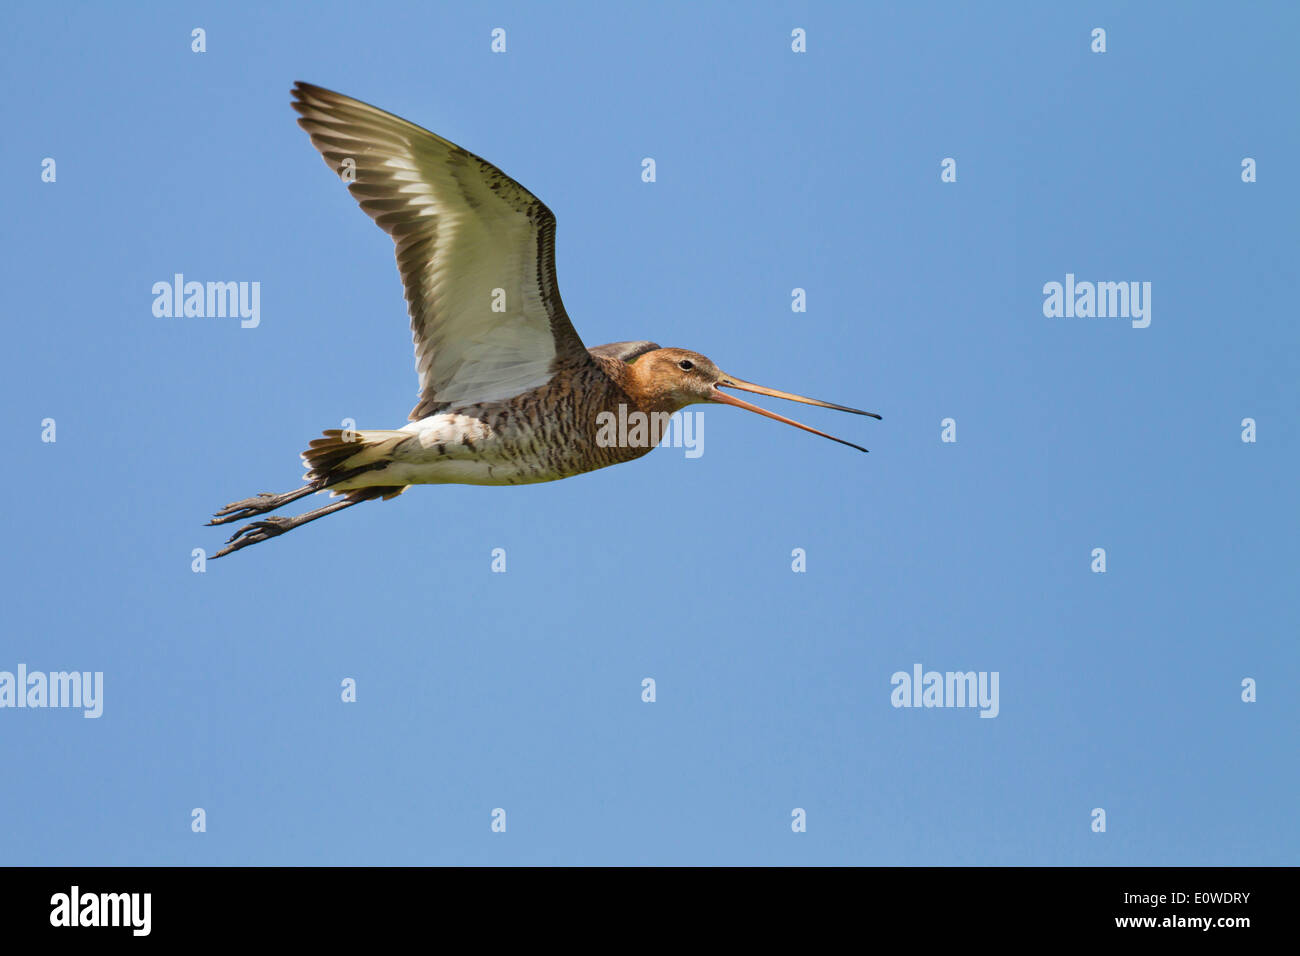 Black-tailed Godwit (Limosa limosa) in flight while calling. Germany Stock Photo